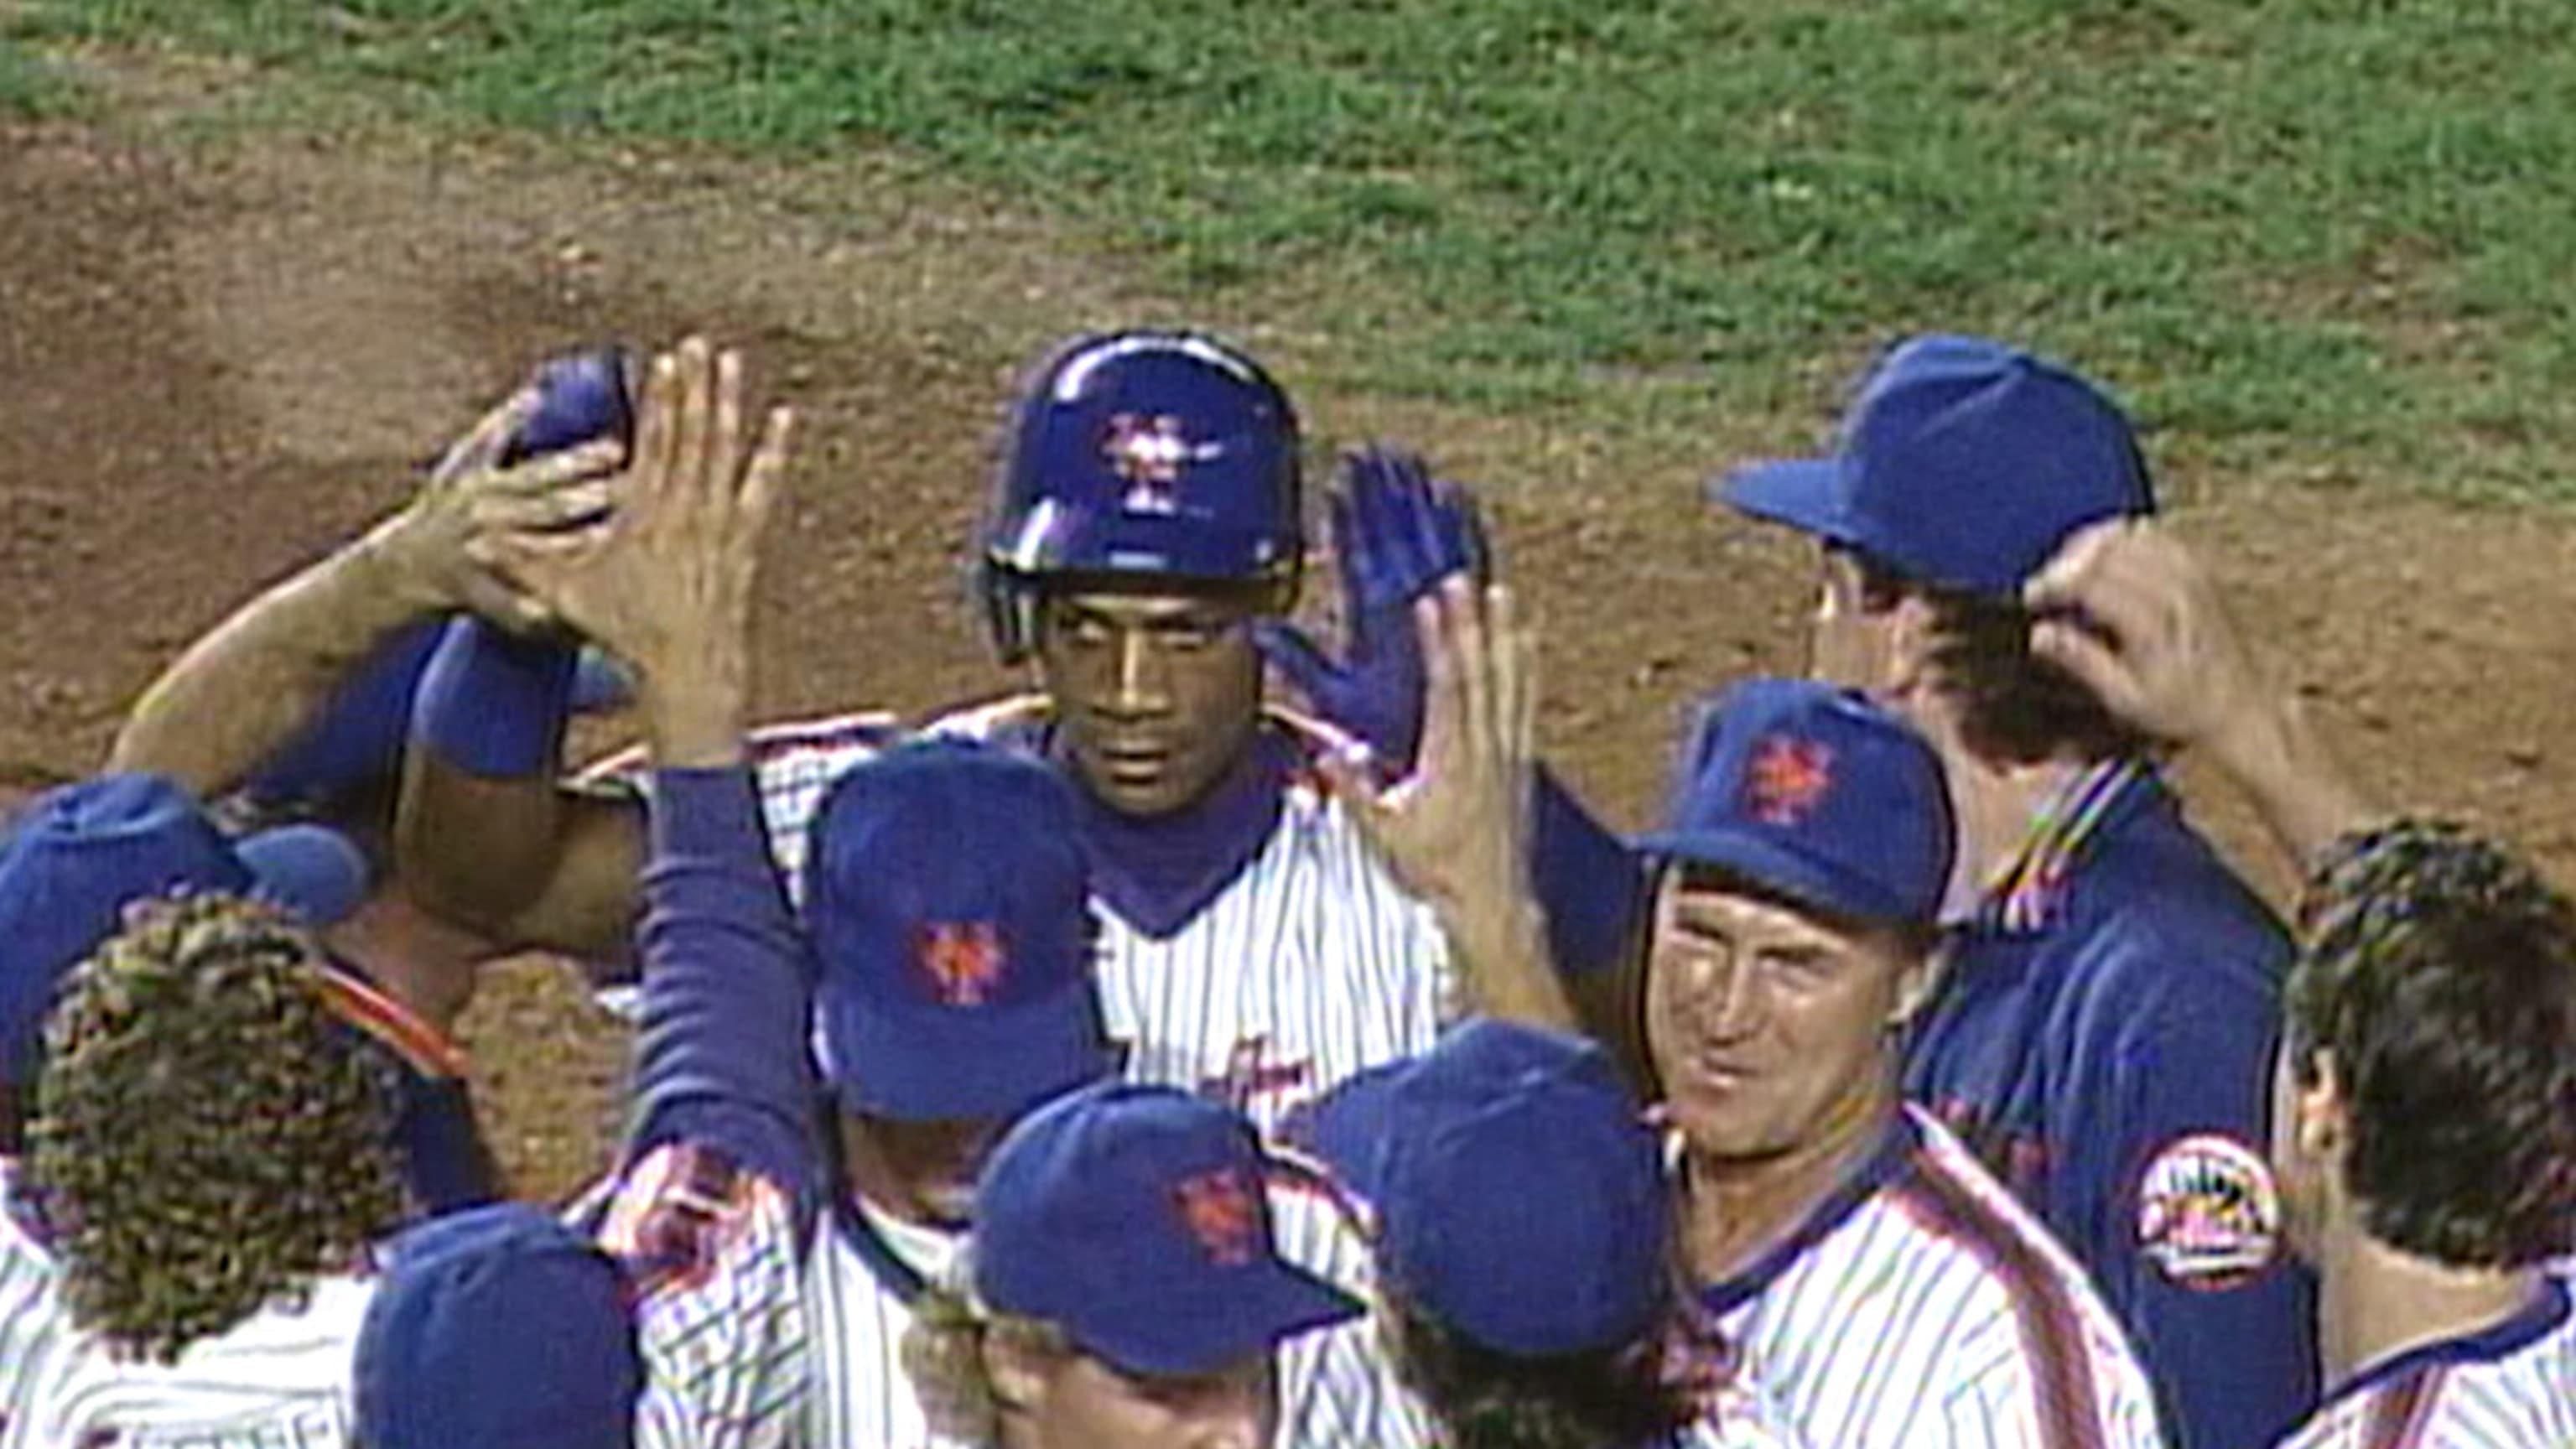 Darryl Strawberry looks back on debut season with Mets